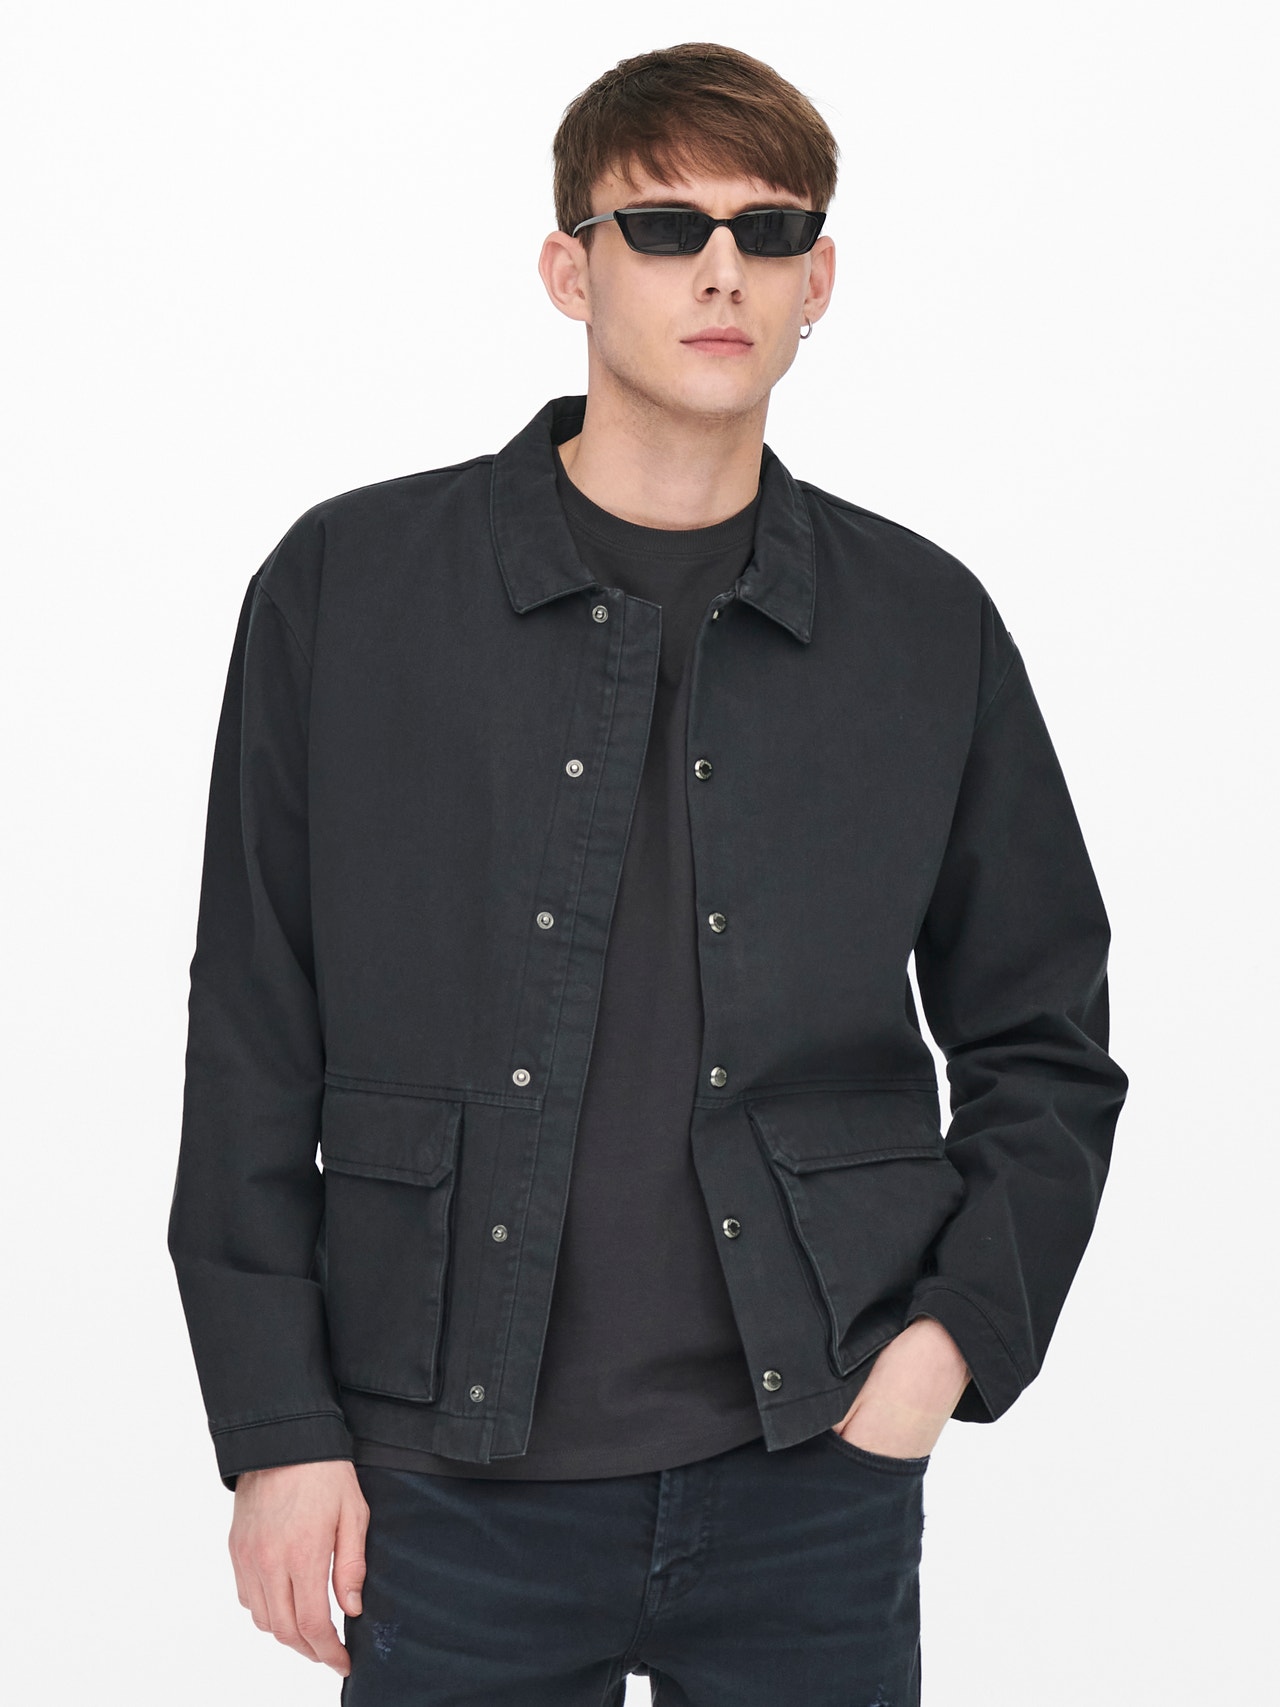 ONLY & SONS Utility Jacket with Pockets -Dark Navy - 22020517